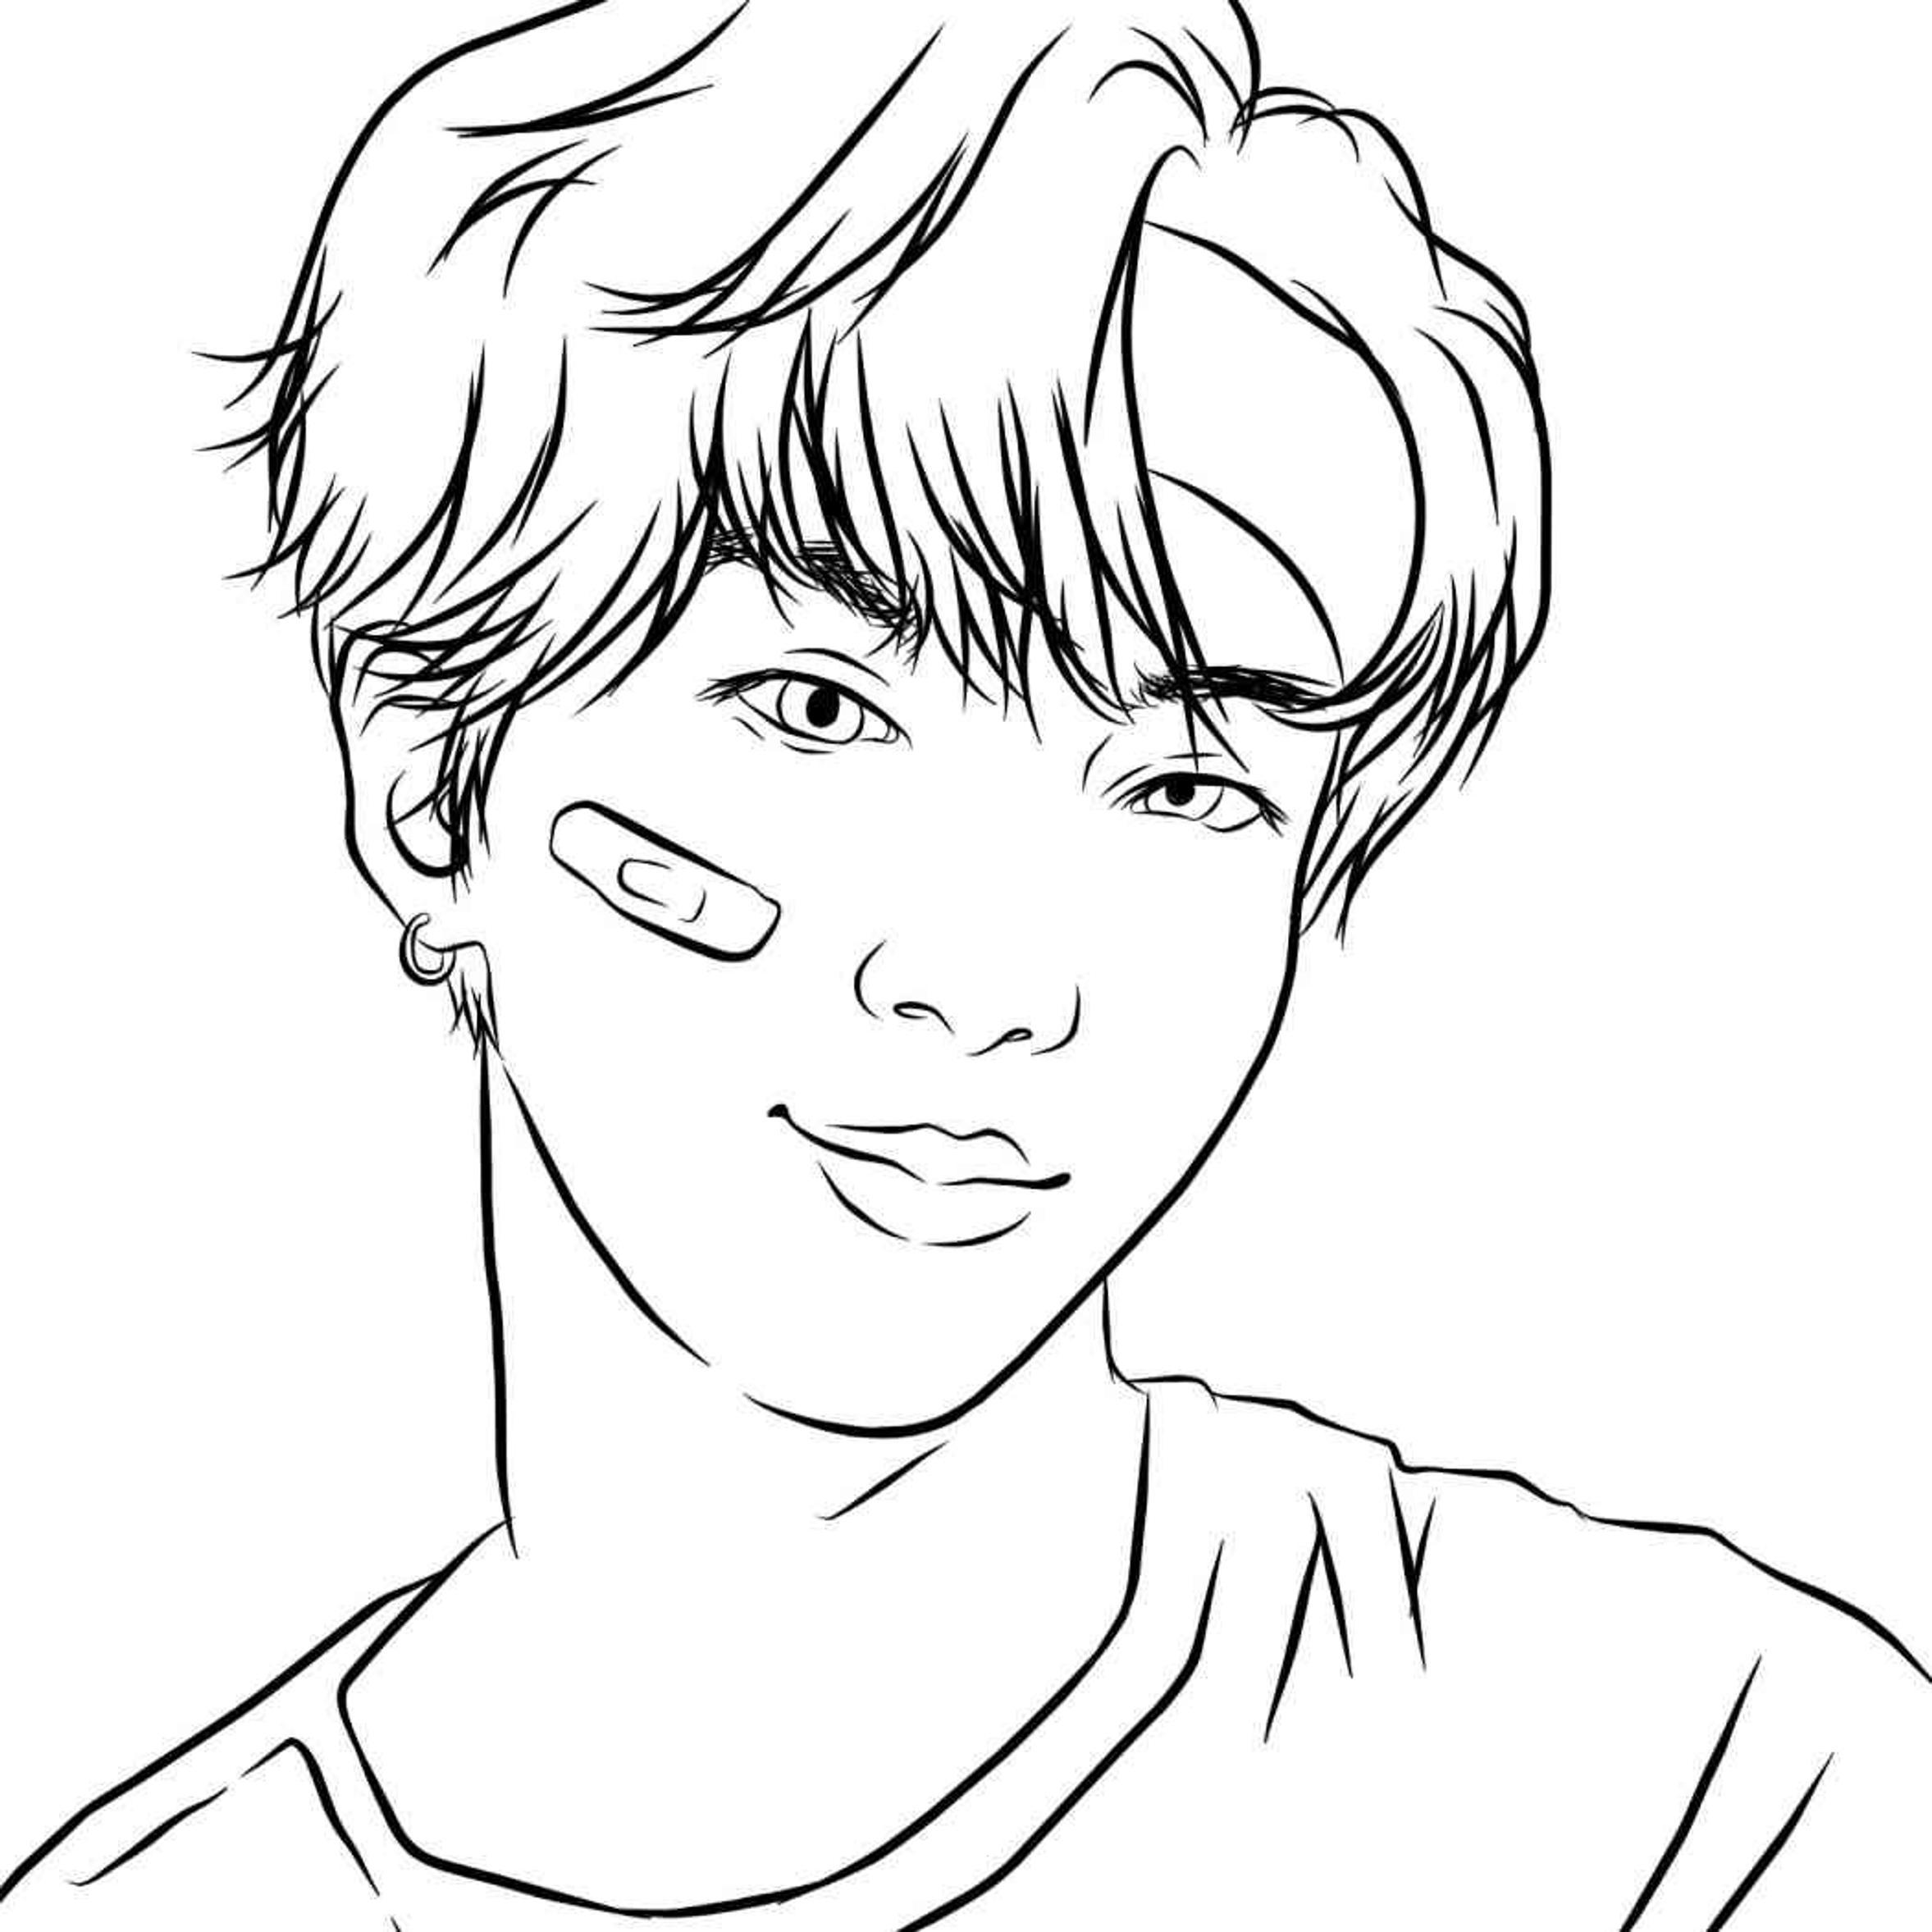 BTS Coloring Pages For Kids